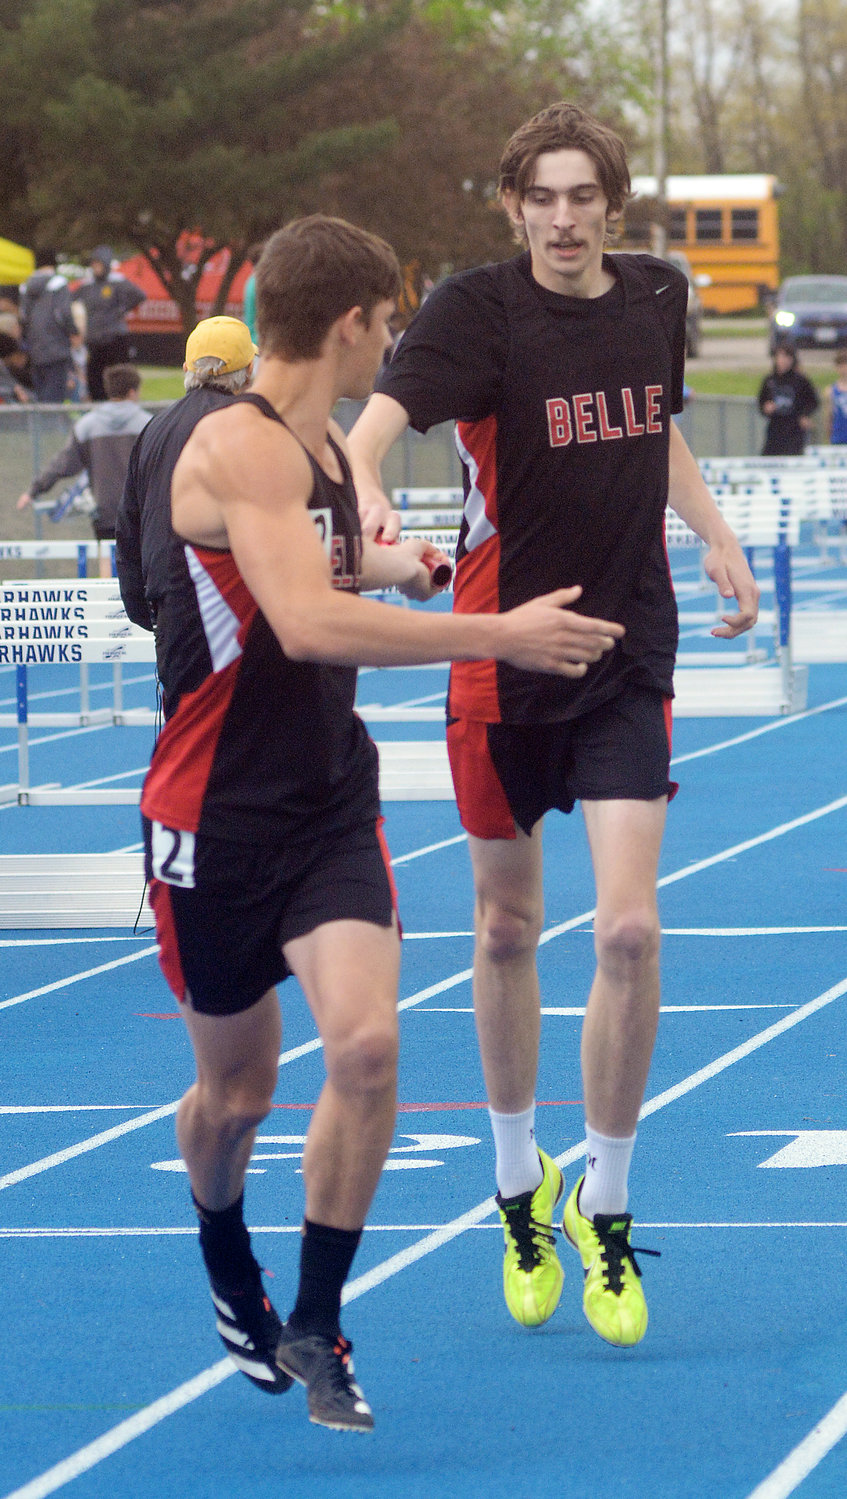 Corey McDaniel (far left) reaches for the baton from Keith Rose for Belle’s Tigers during the varsity boys 4x800-meter relay at the Gasconade Valley Conference (GVC) Track Meet held Saturday at Bourbon High School.